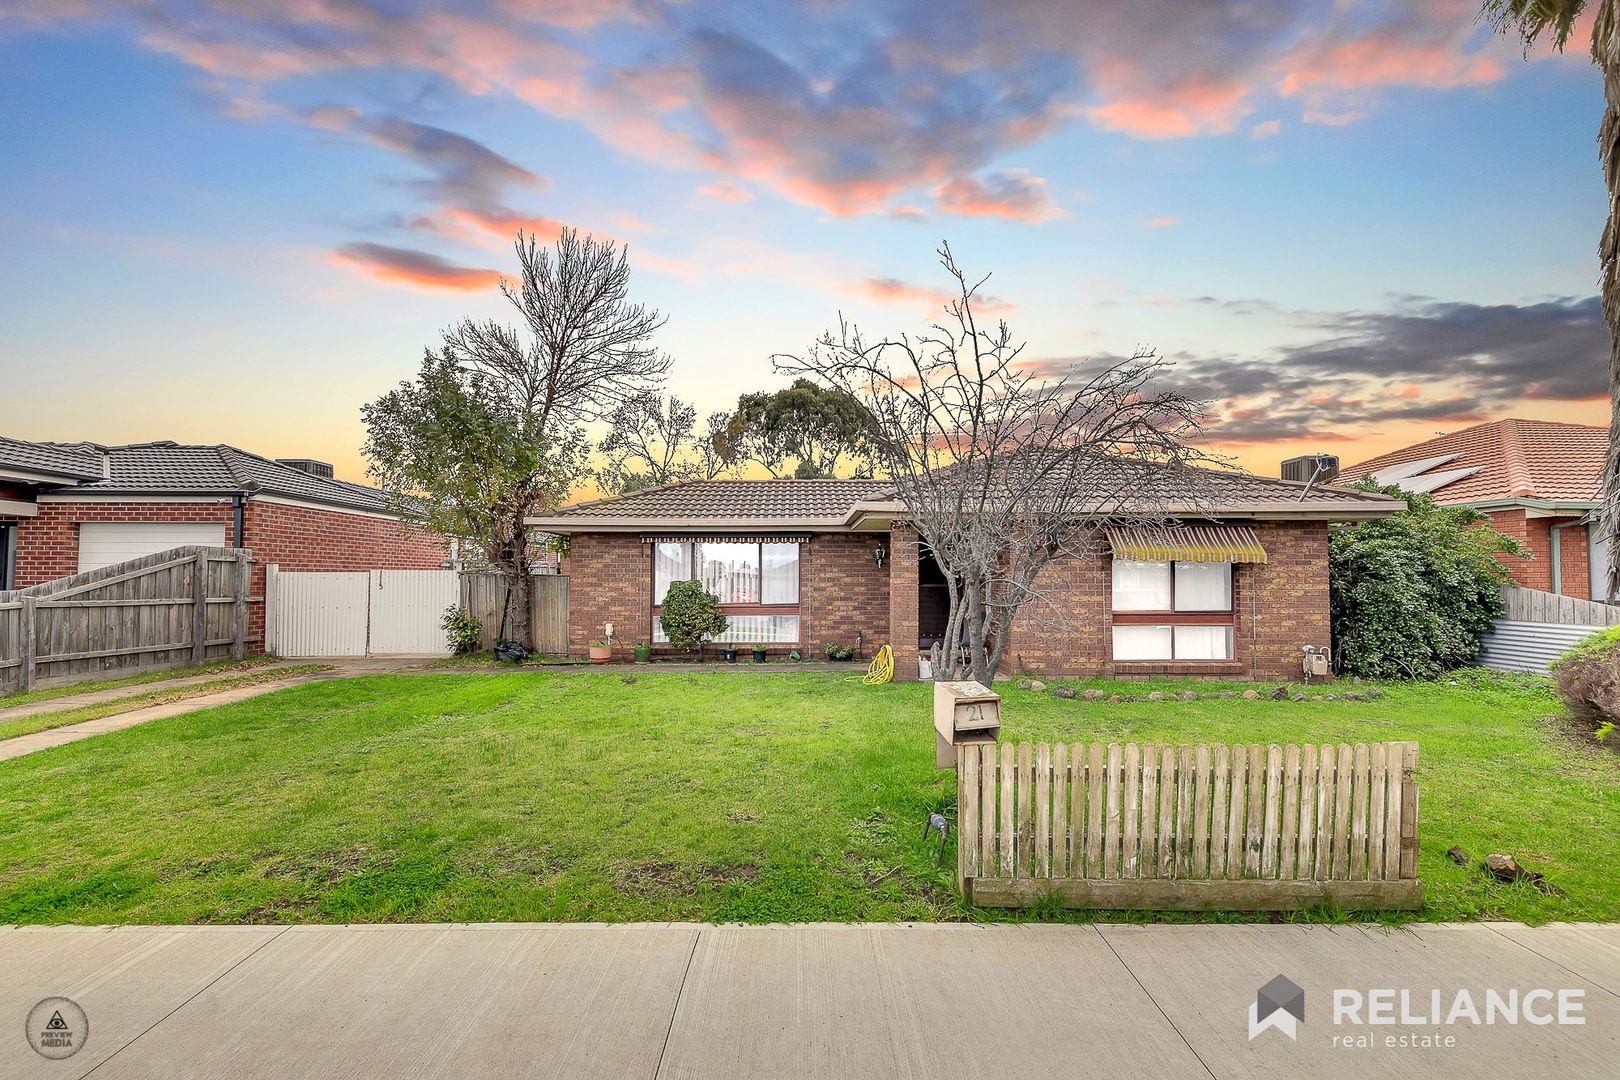 21 Sycamore Street, Hoppers Crossing VIC 3029